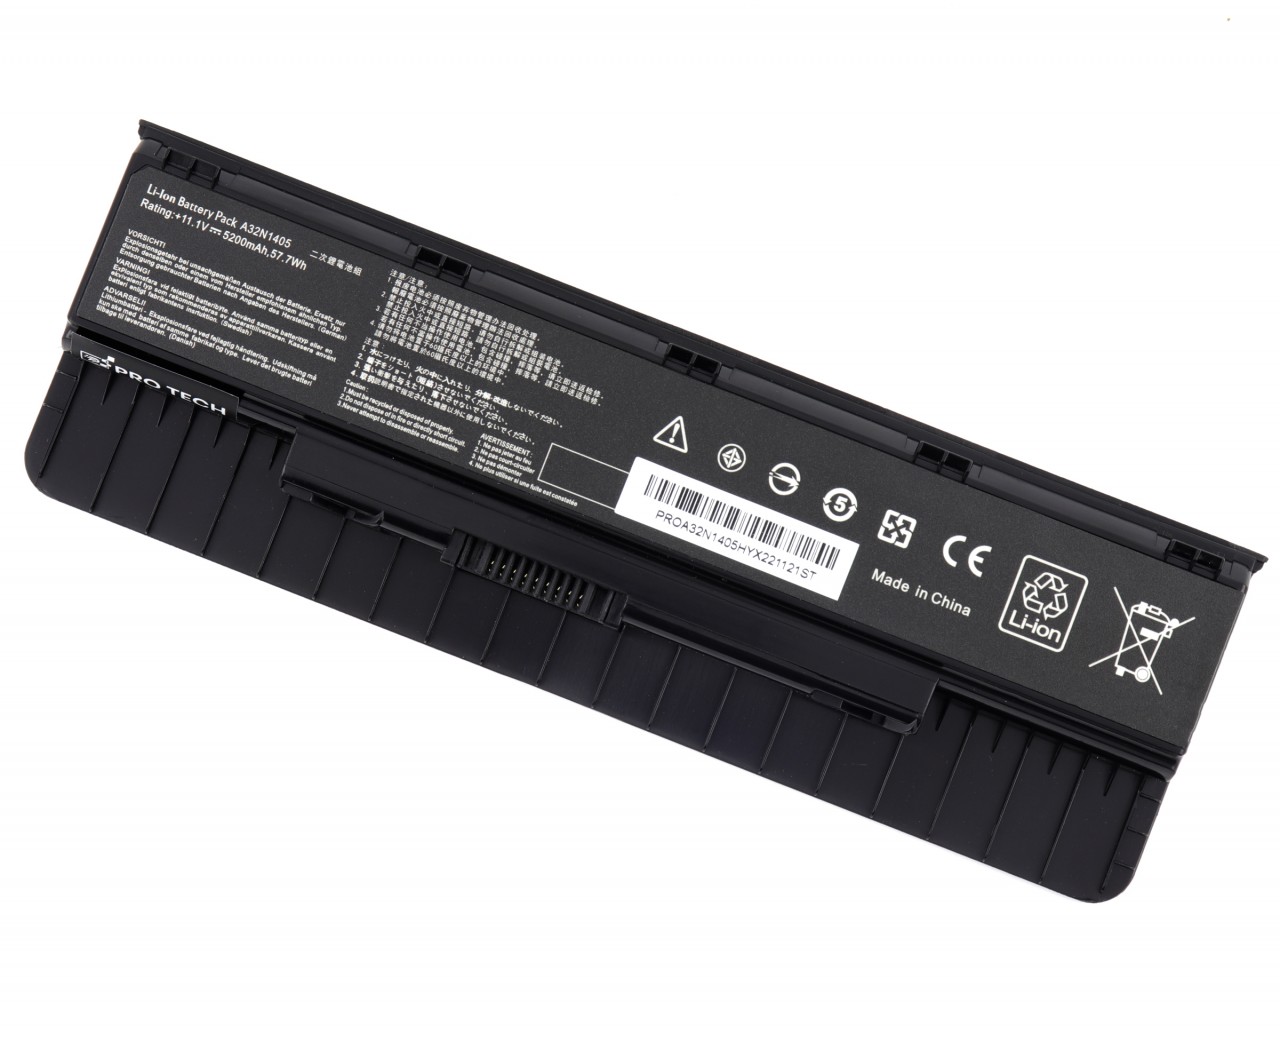 Baterie Asus ROG G56JK 57.7Wh / 5200mAh Protech High Quality Replacement